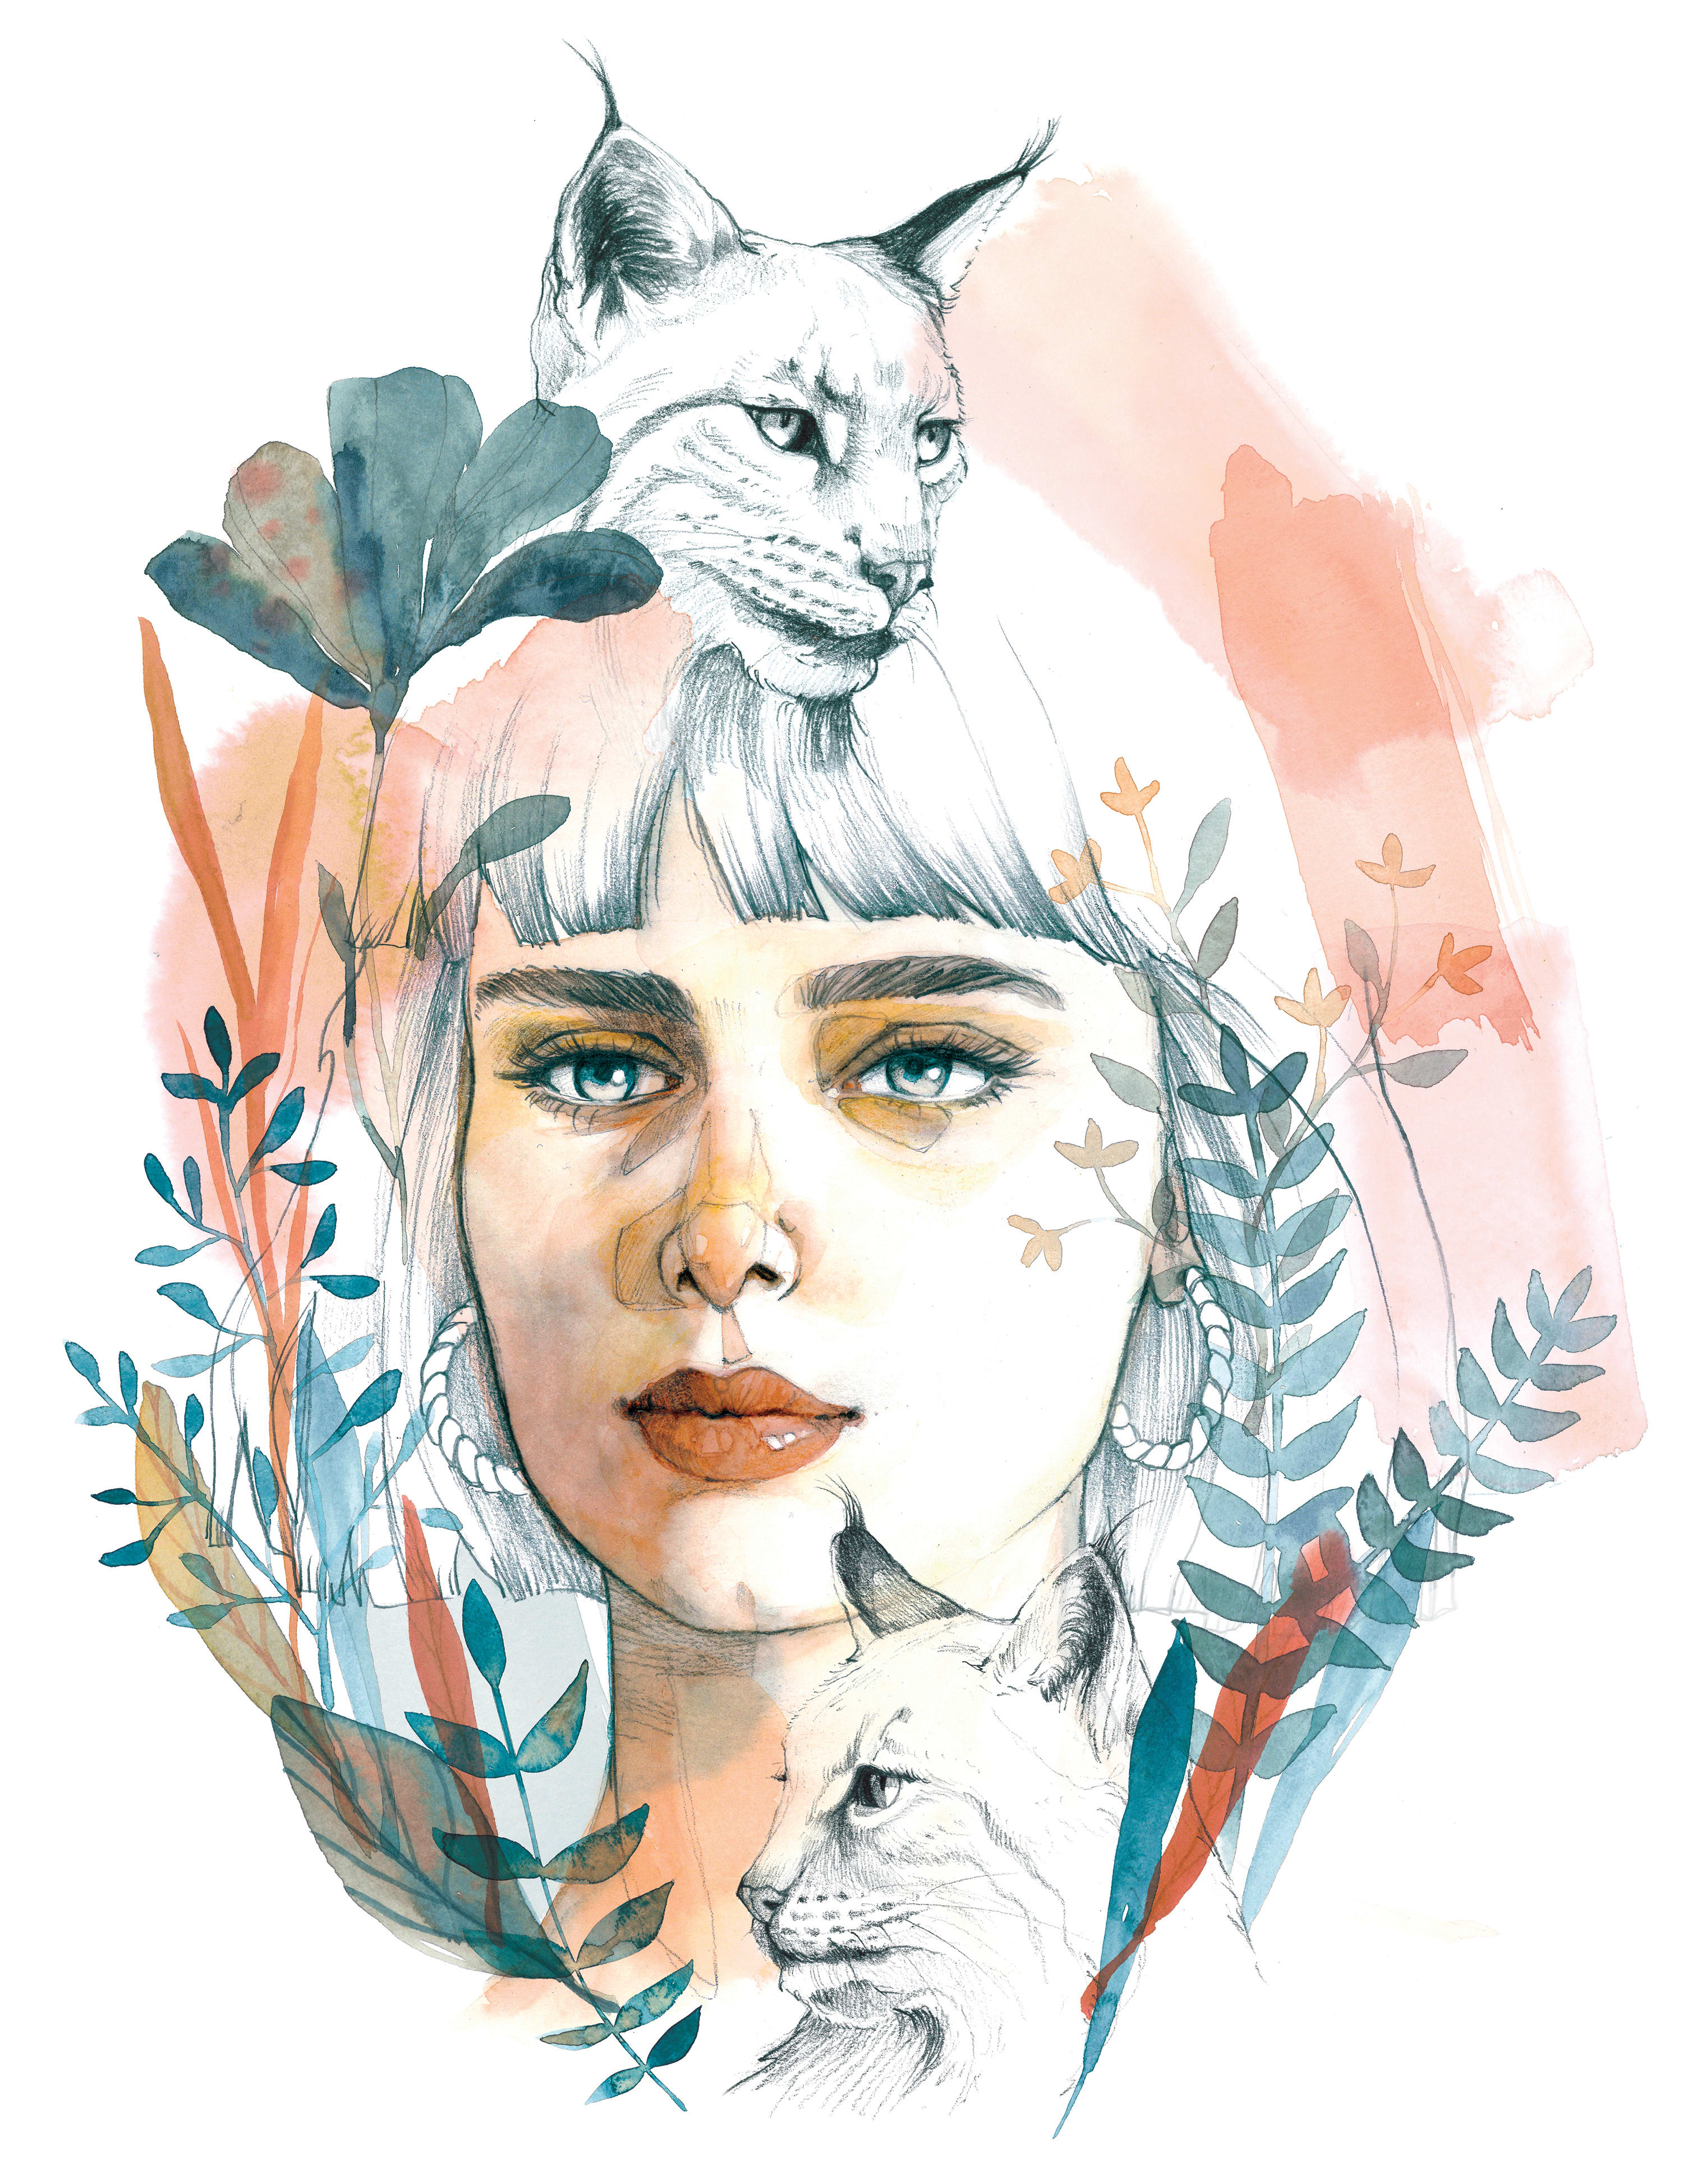 Creative Portraits in Watercolor by Ana Santos, Quarto At A Glance